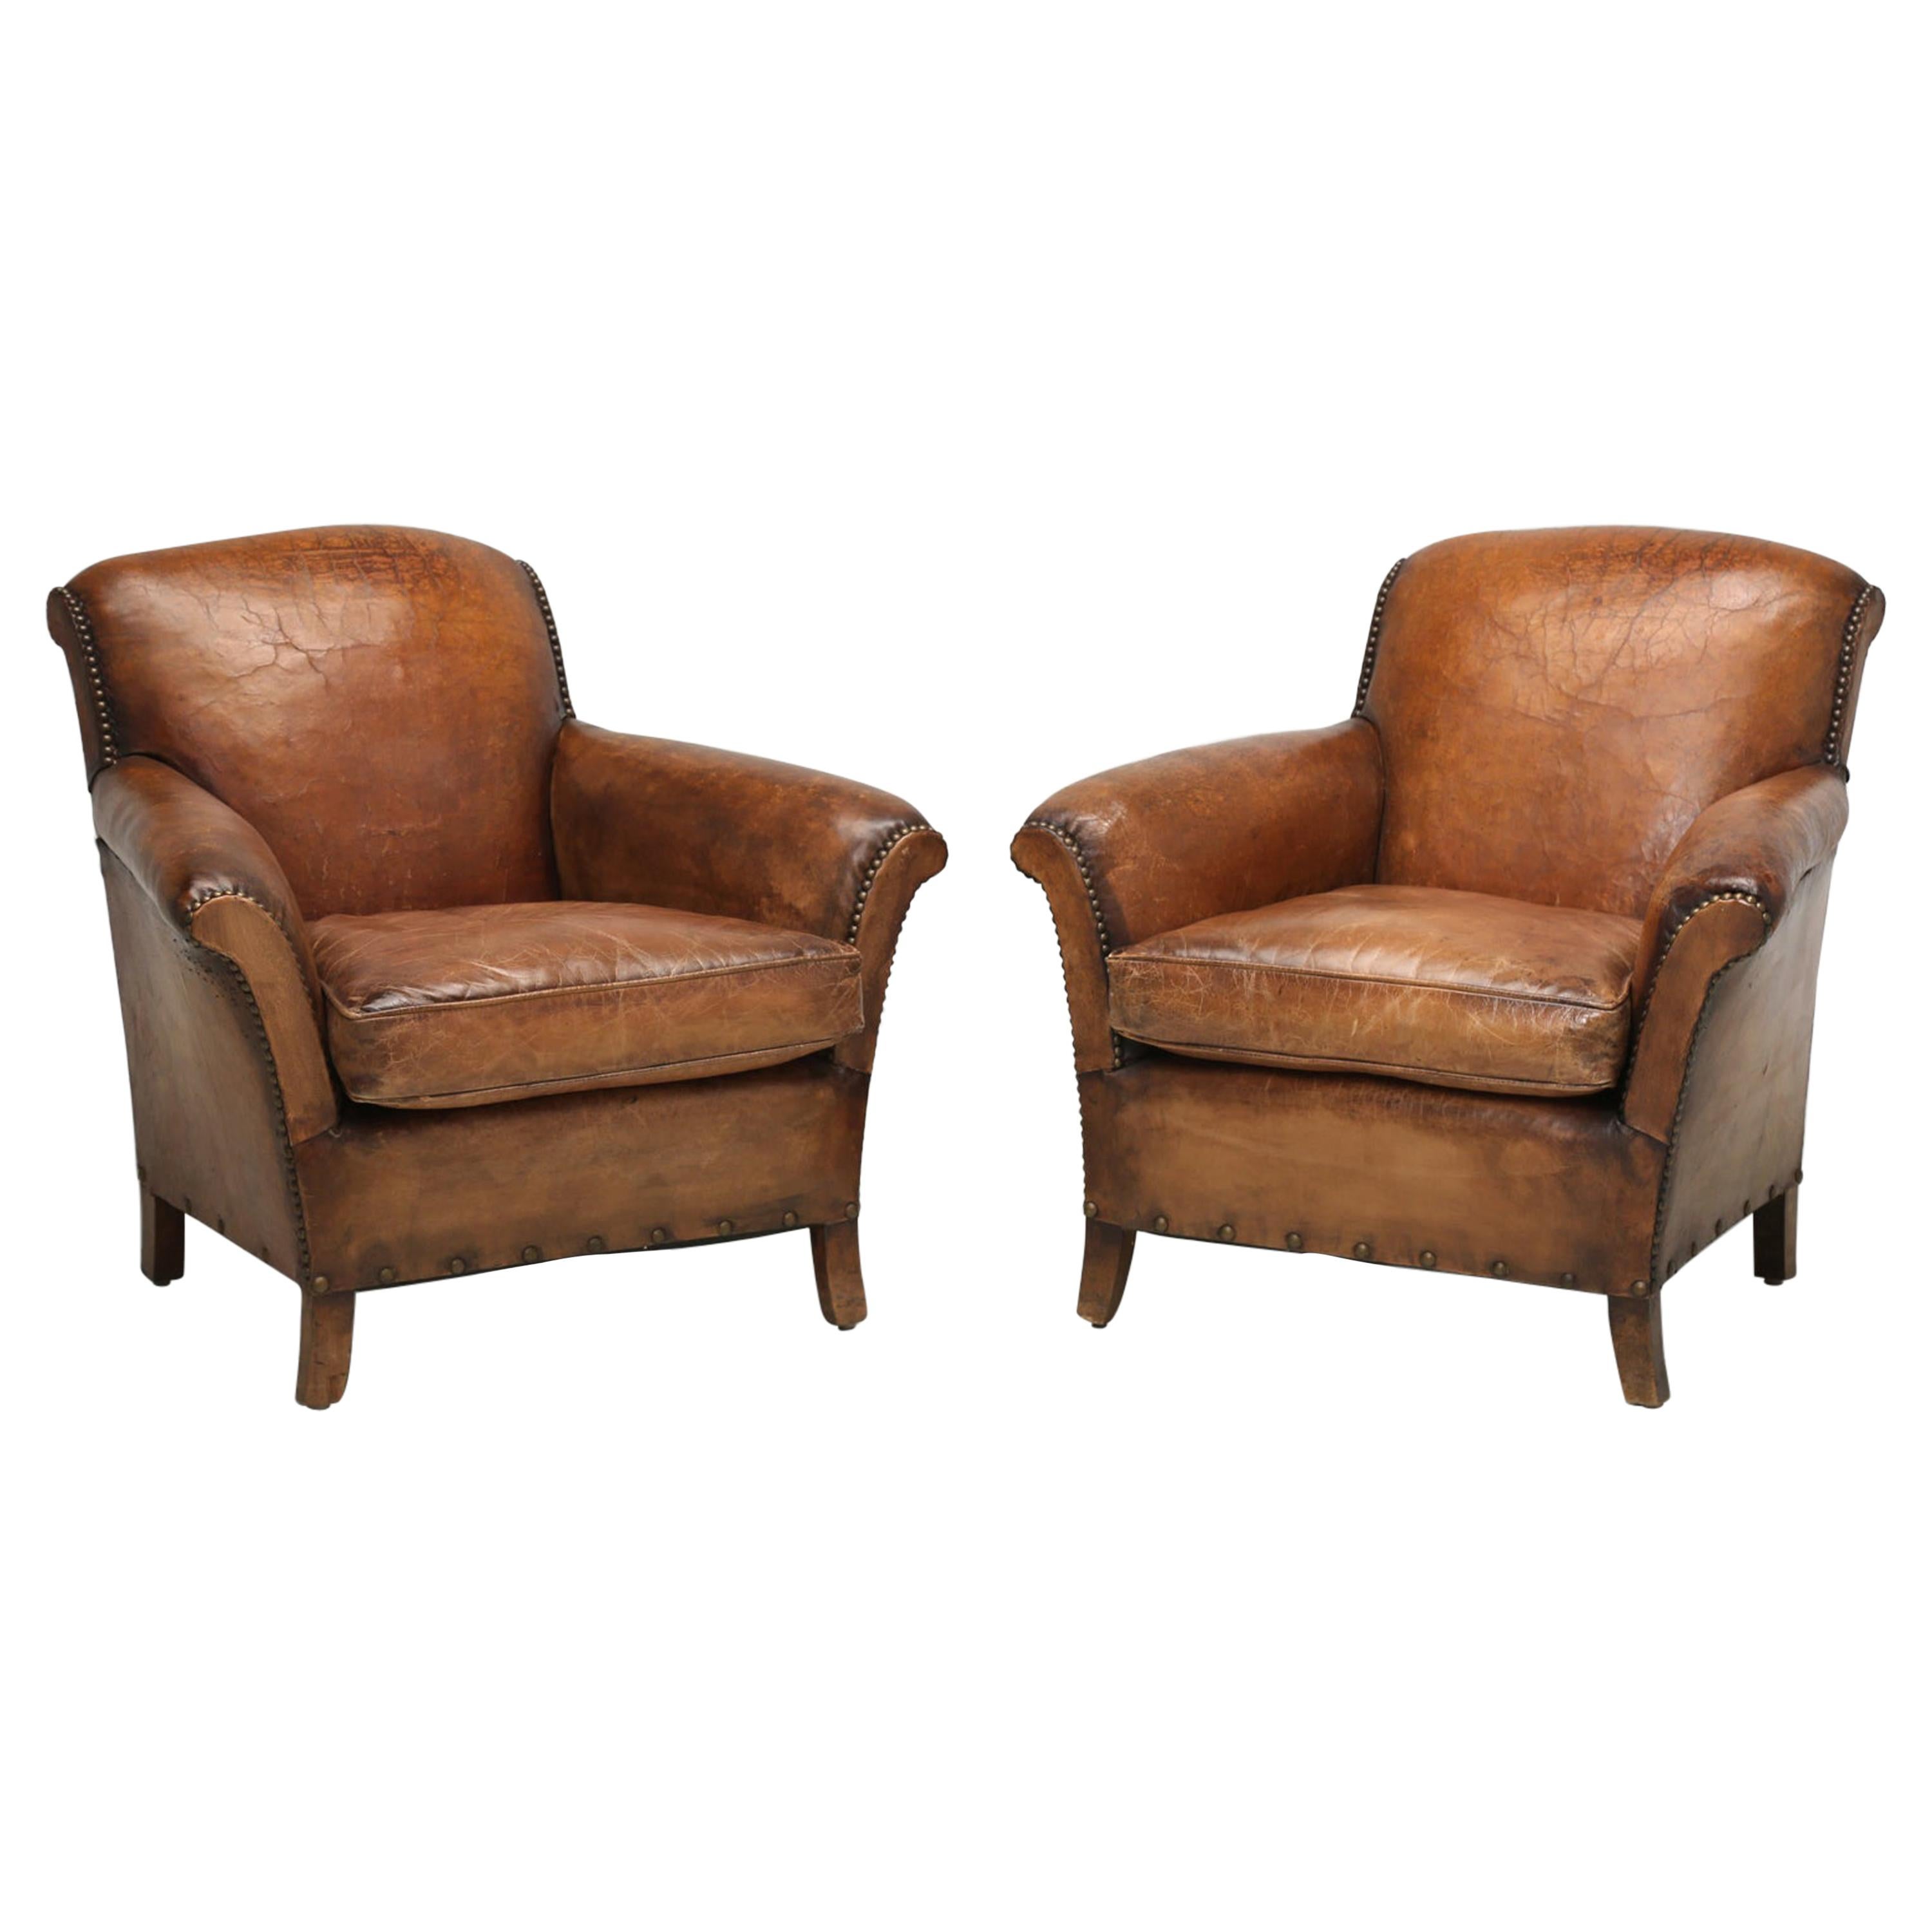 French Art Deco Pair Leather Club Chairs Restored Internally to a High Standard